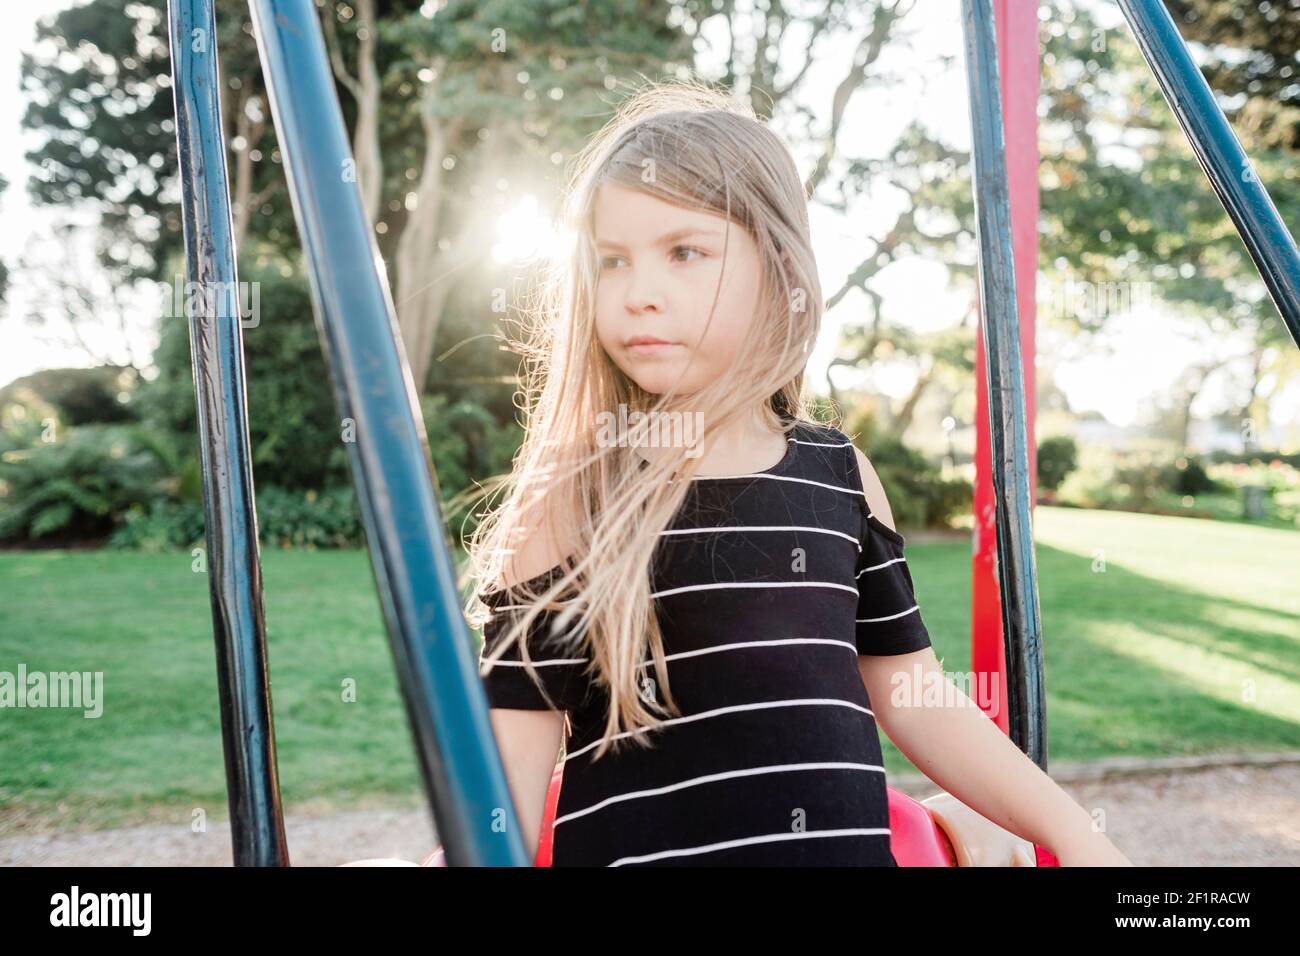 Young girl standing on a swing at a public playground Stock Photo